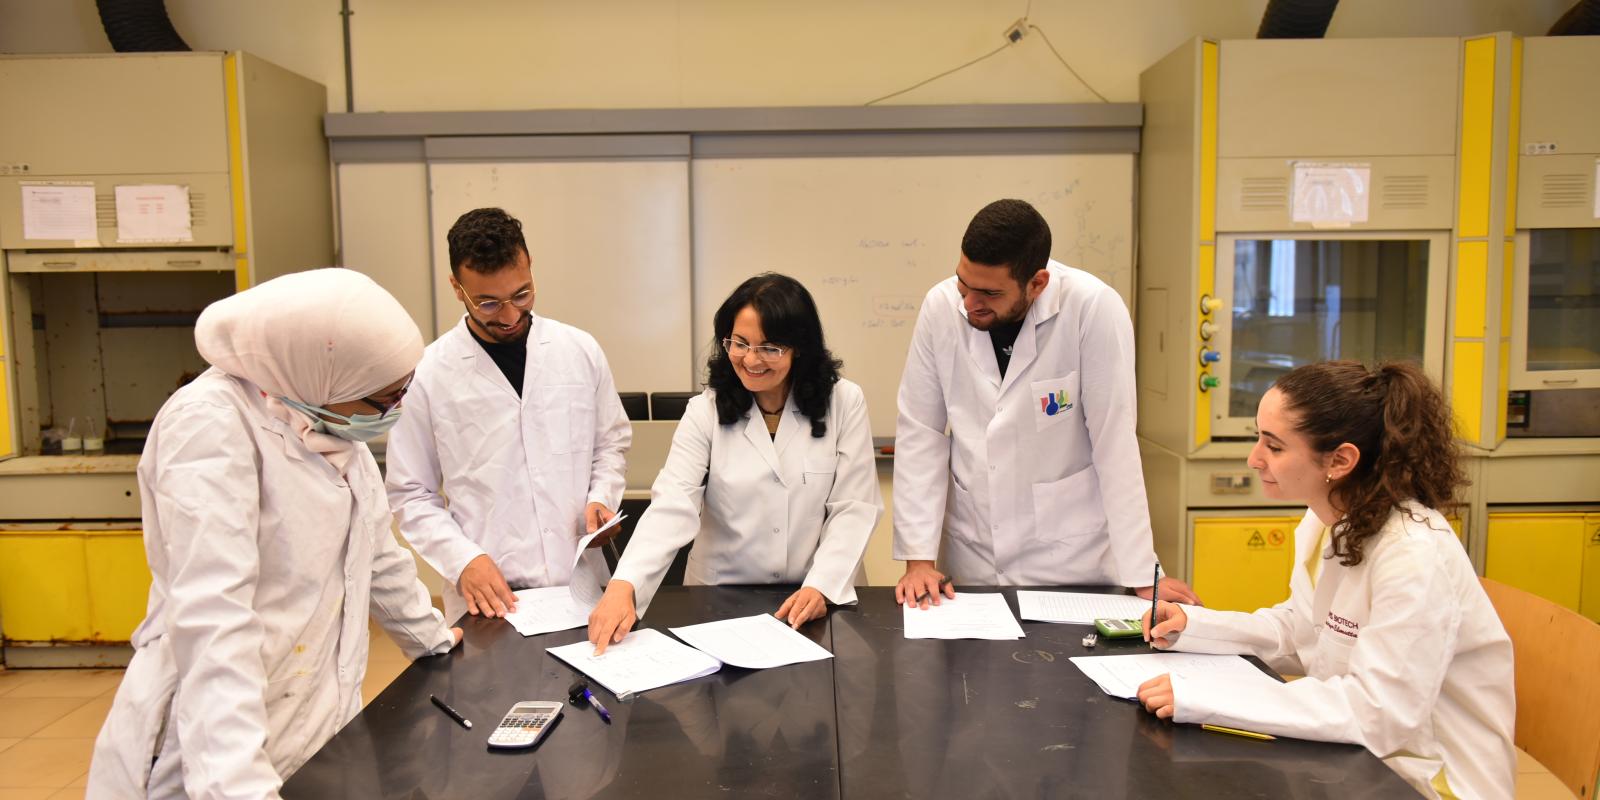 Students and a faculty member in the lab